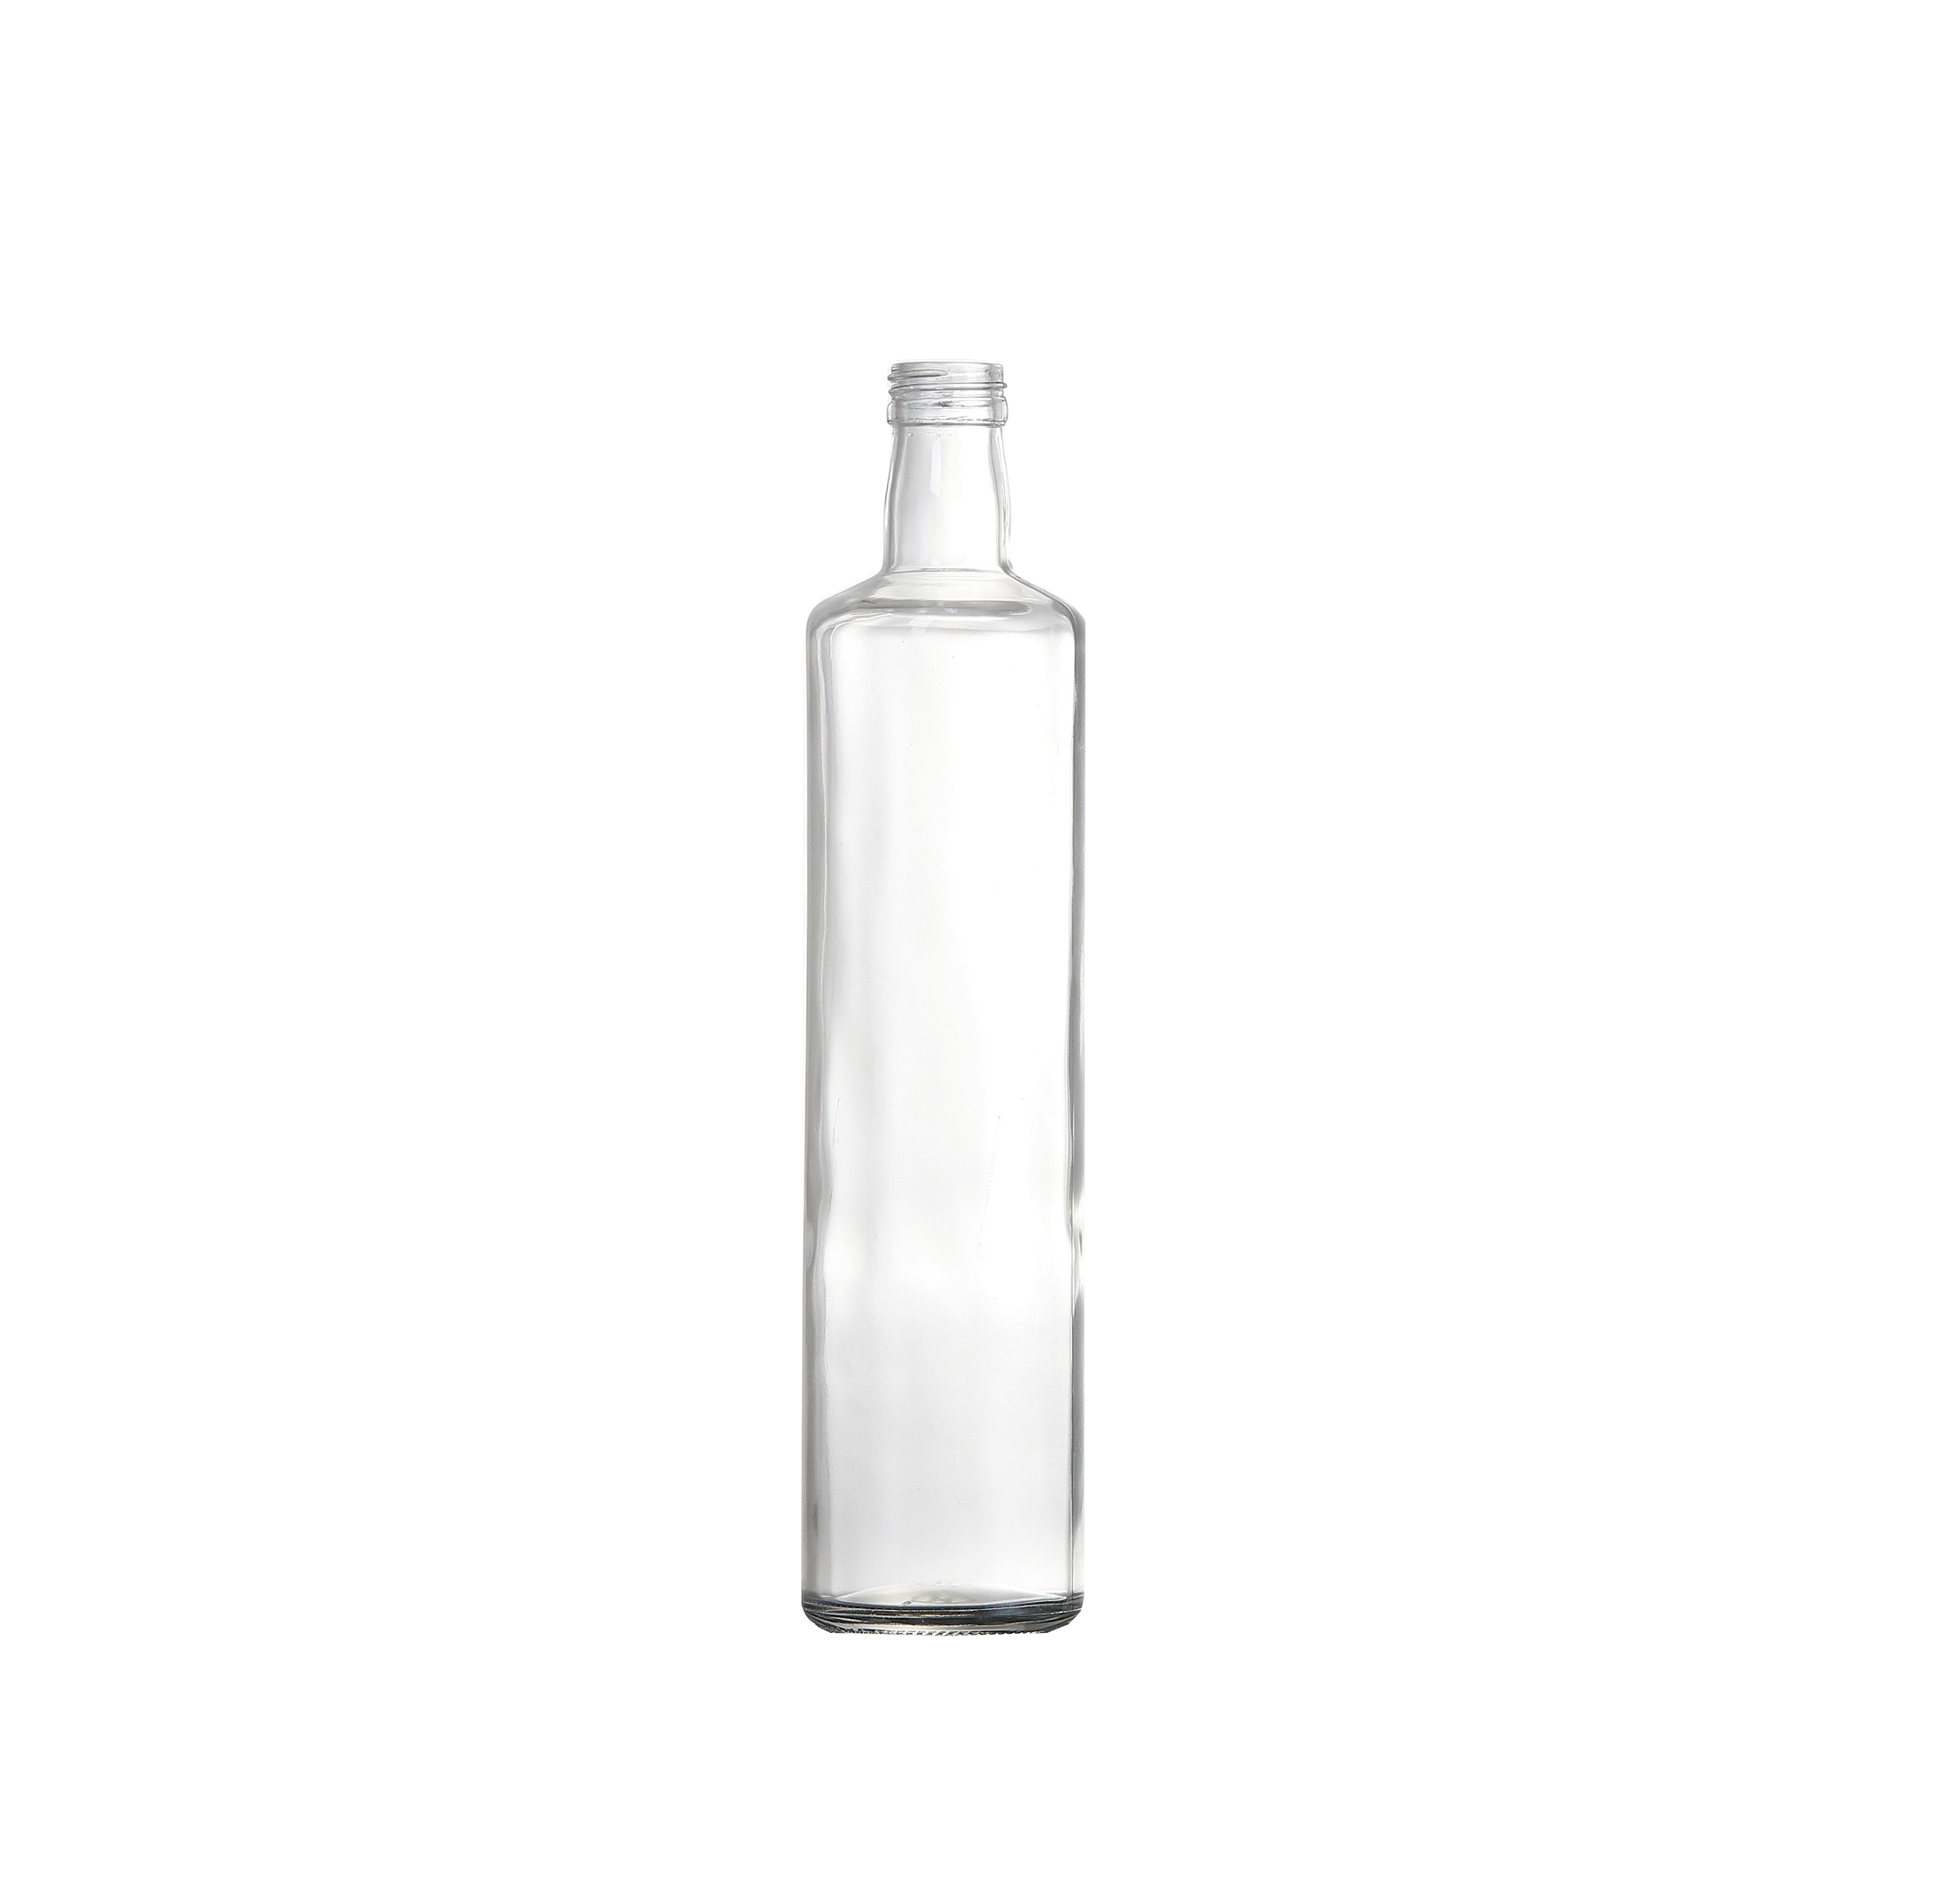 Glass Bottle Empty Free HQ Image PNG Image